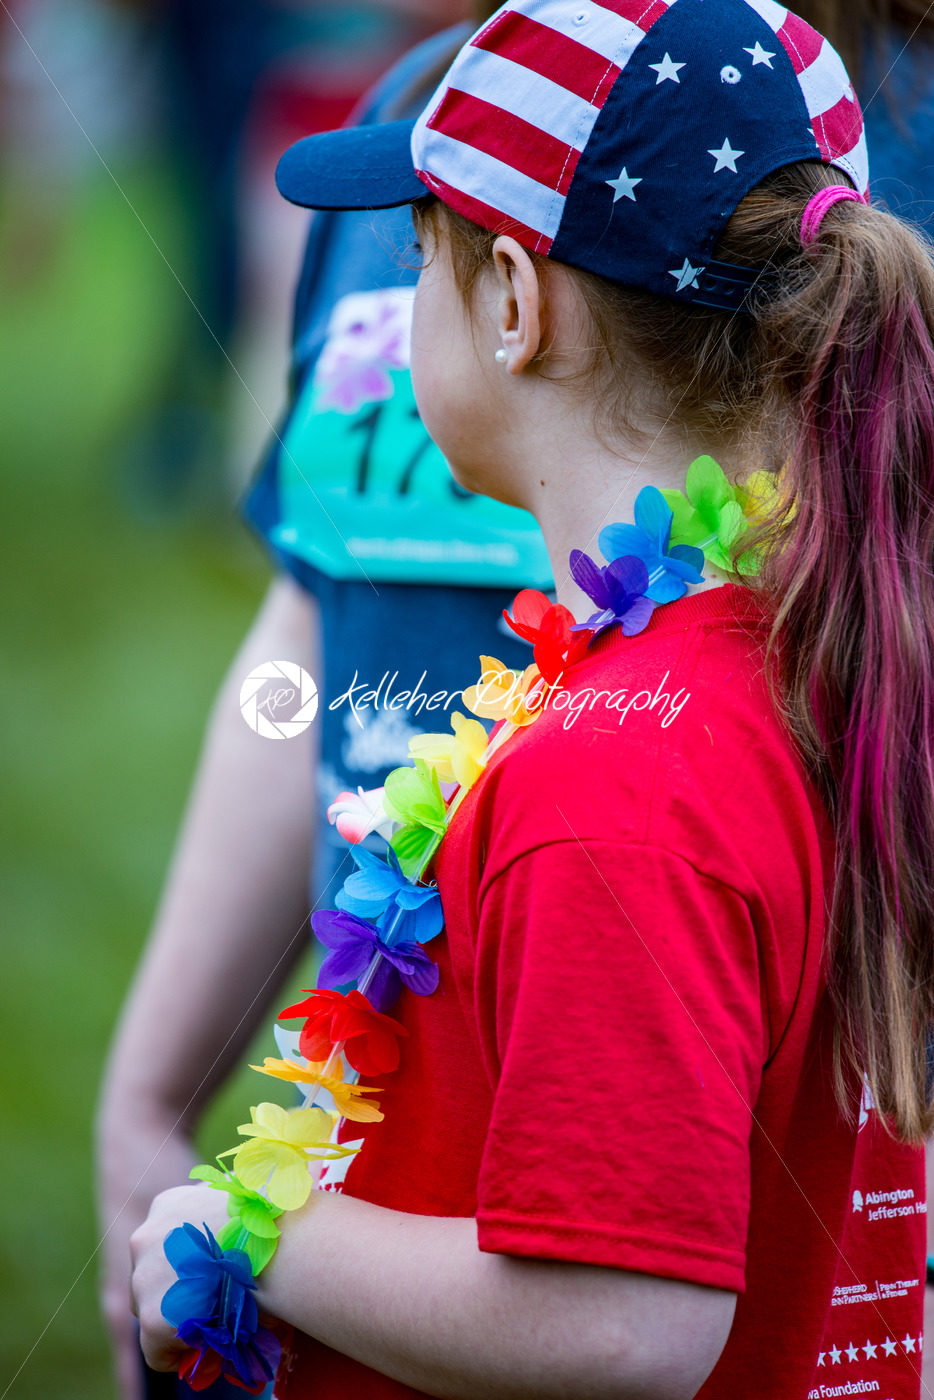 Blue Bell, PA -May 20, 2018: Girls on the Run 5k Candids - Kelleher Photography Store